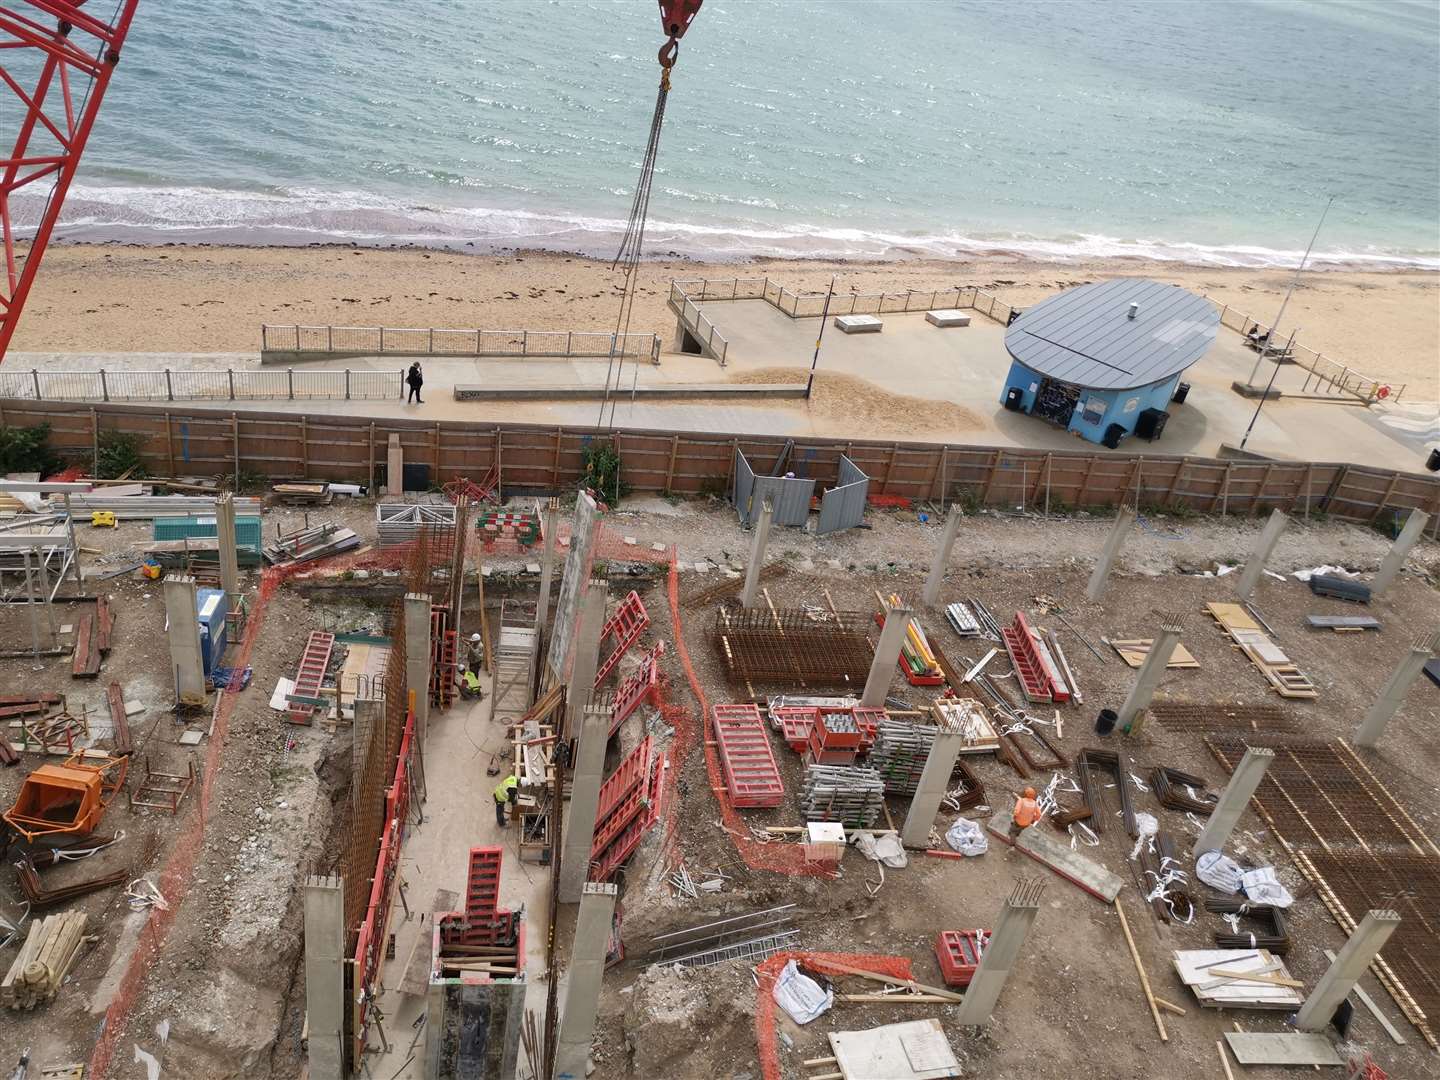 Work finally restarted at the seafront site this summer